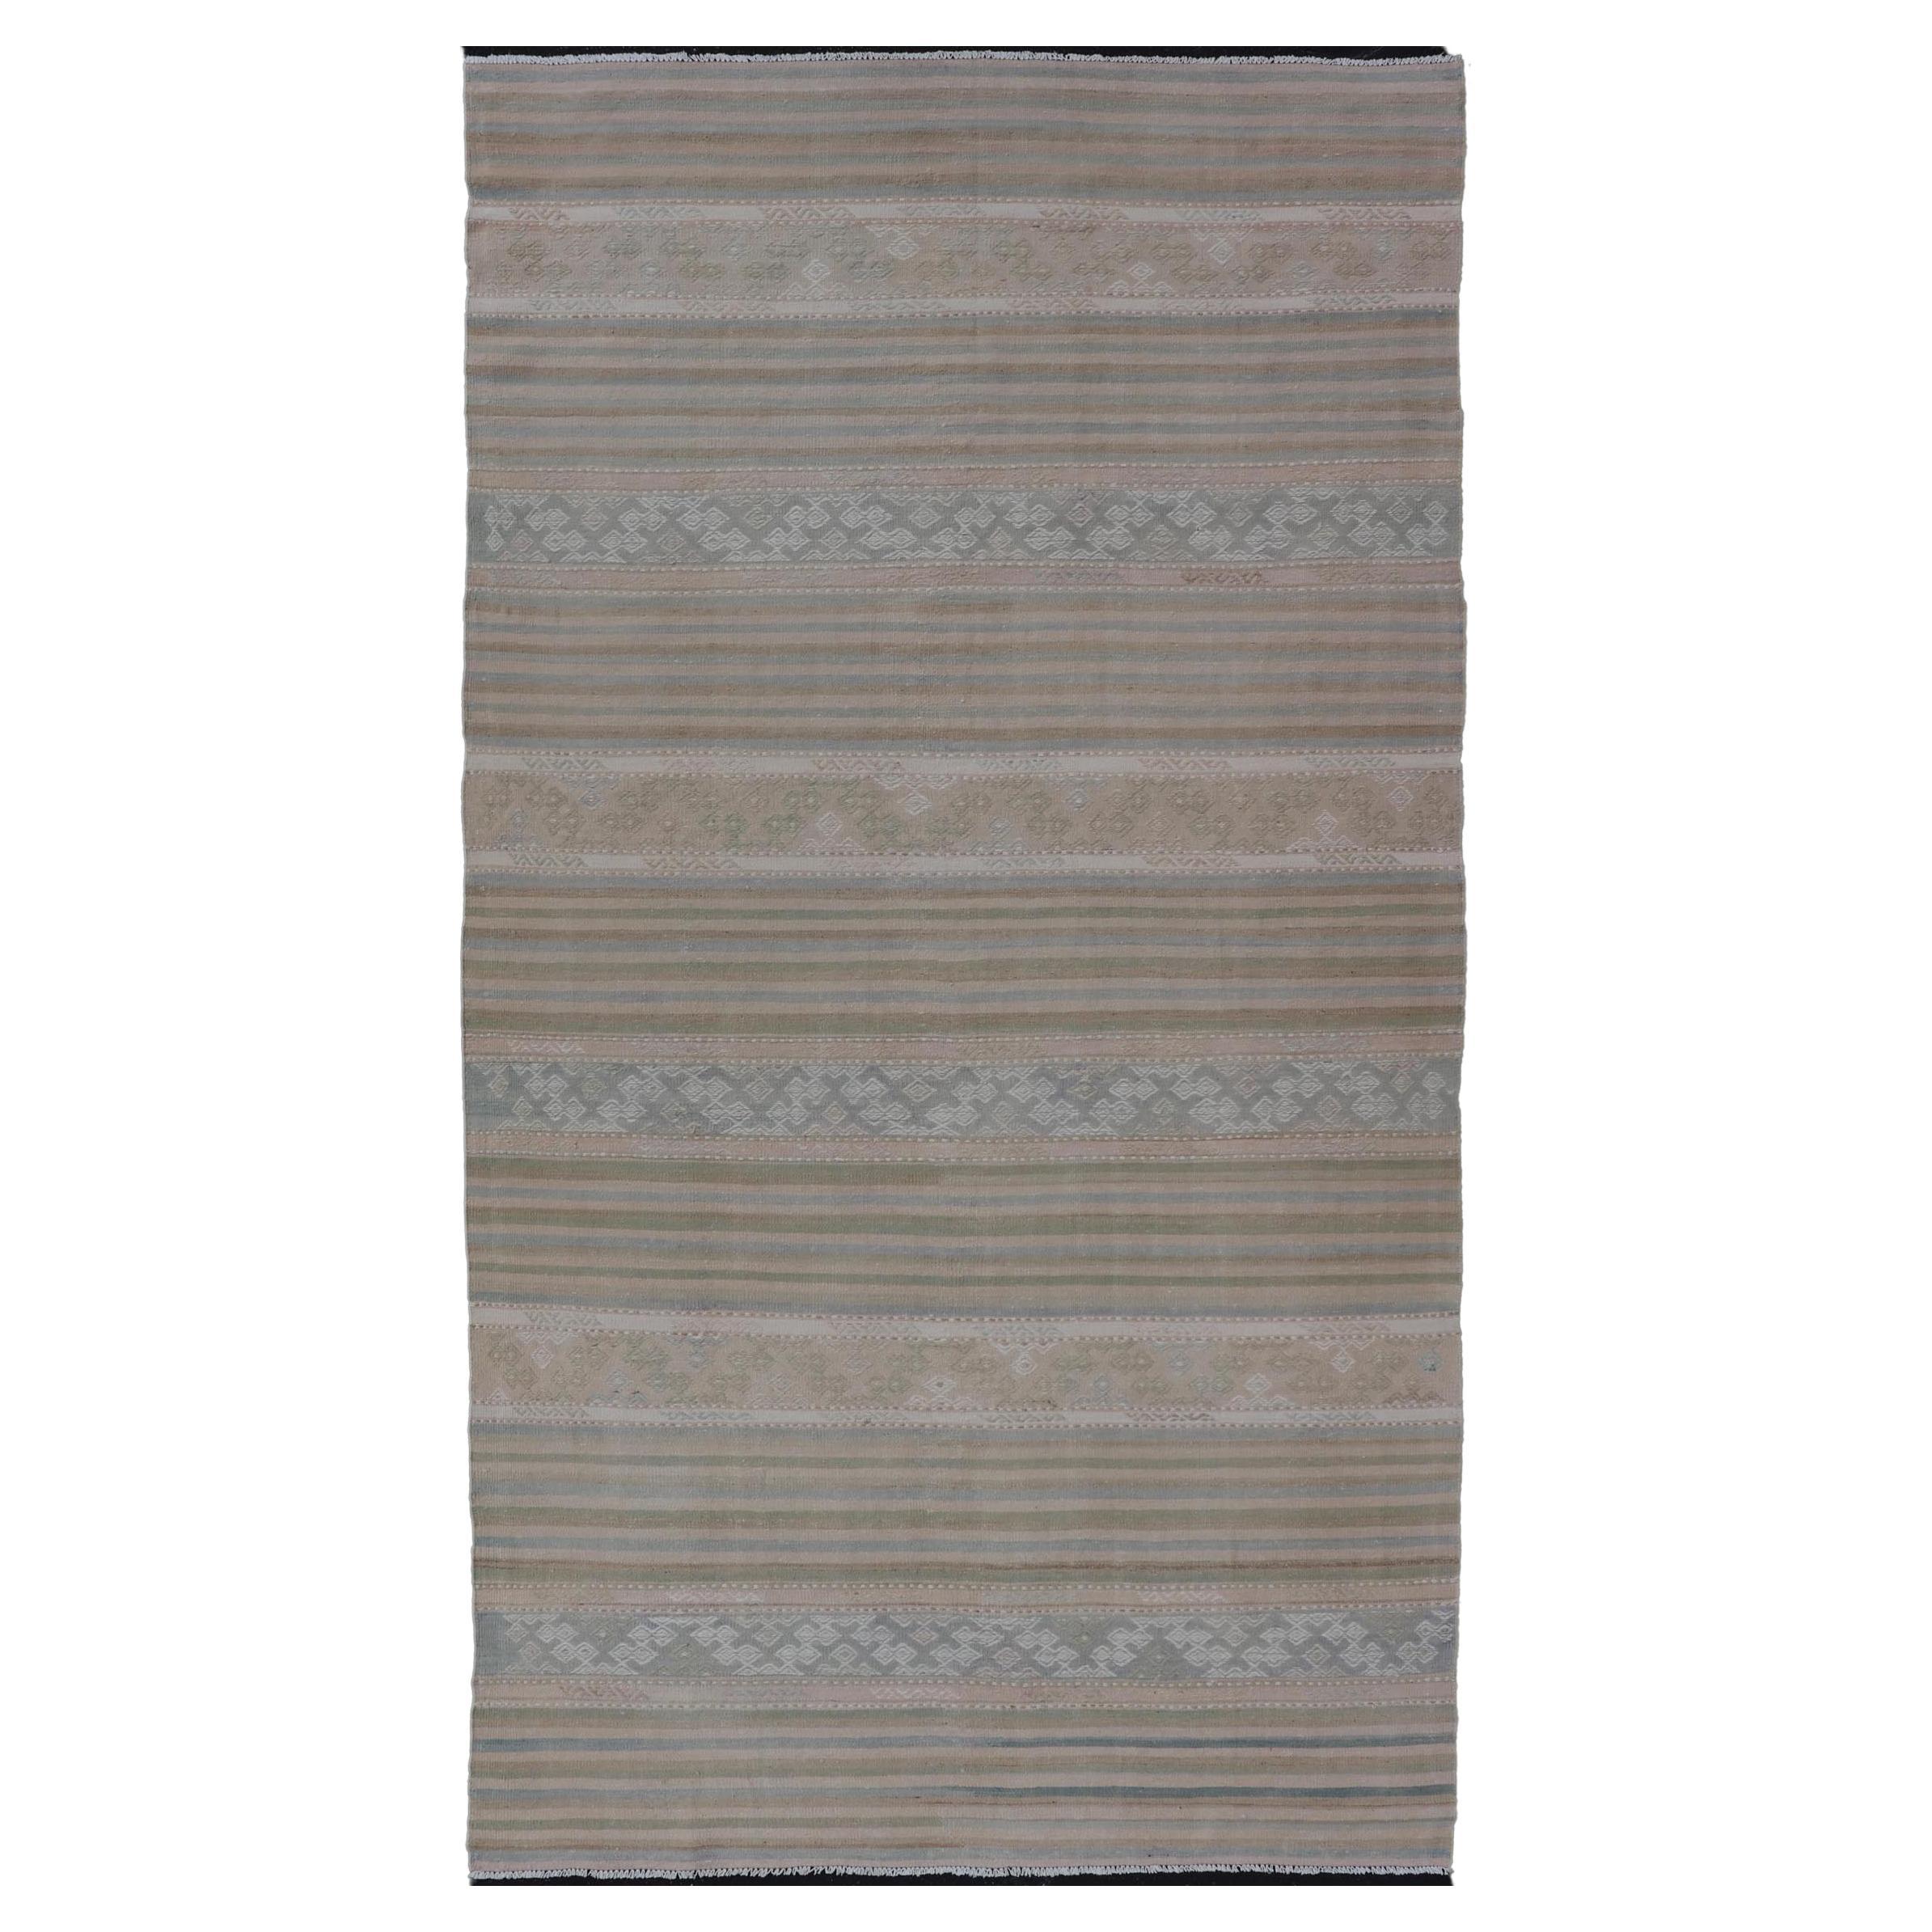 Turkish Gallery Flat-Weave Kilim in Muted Colors with Stripes and Embroideries For Sale